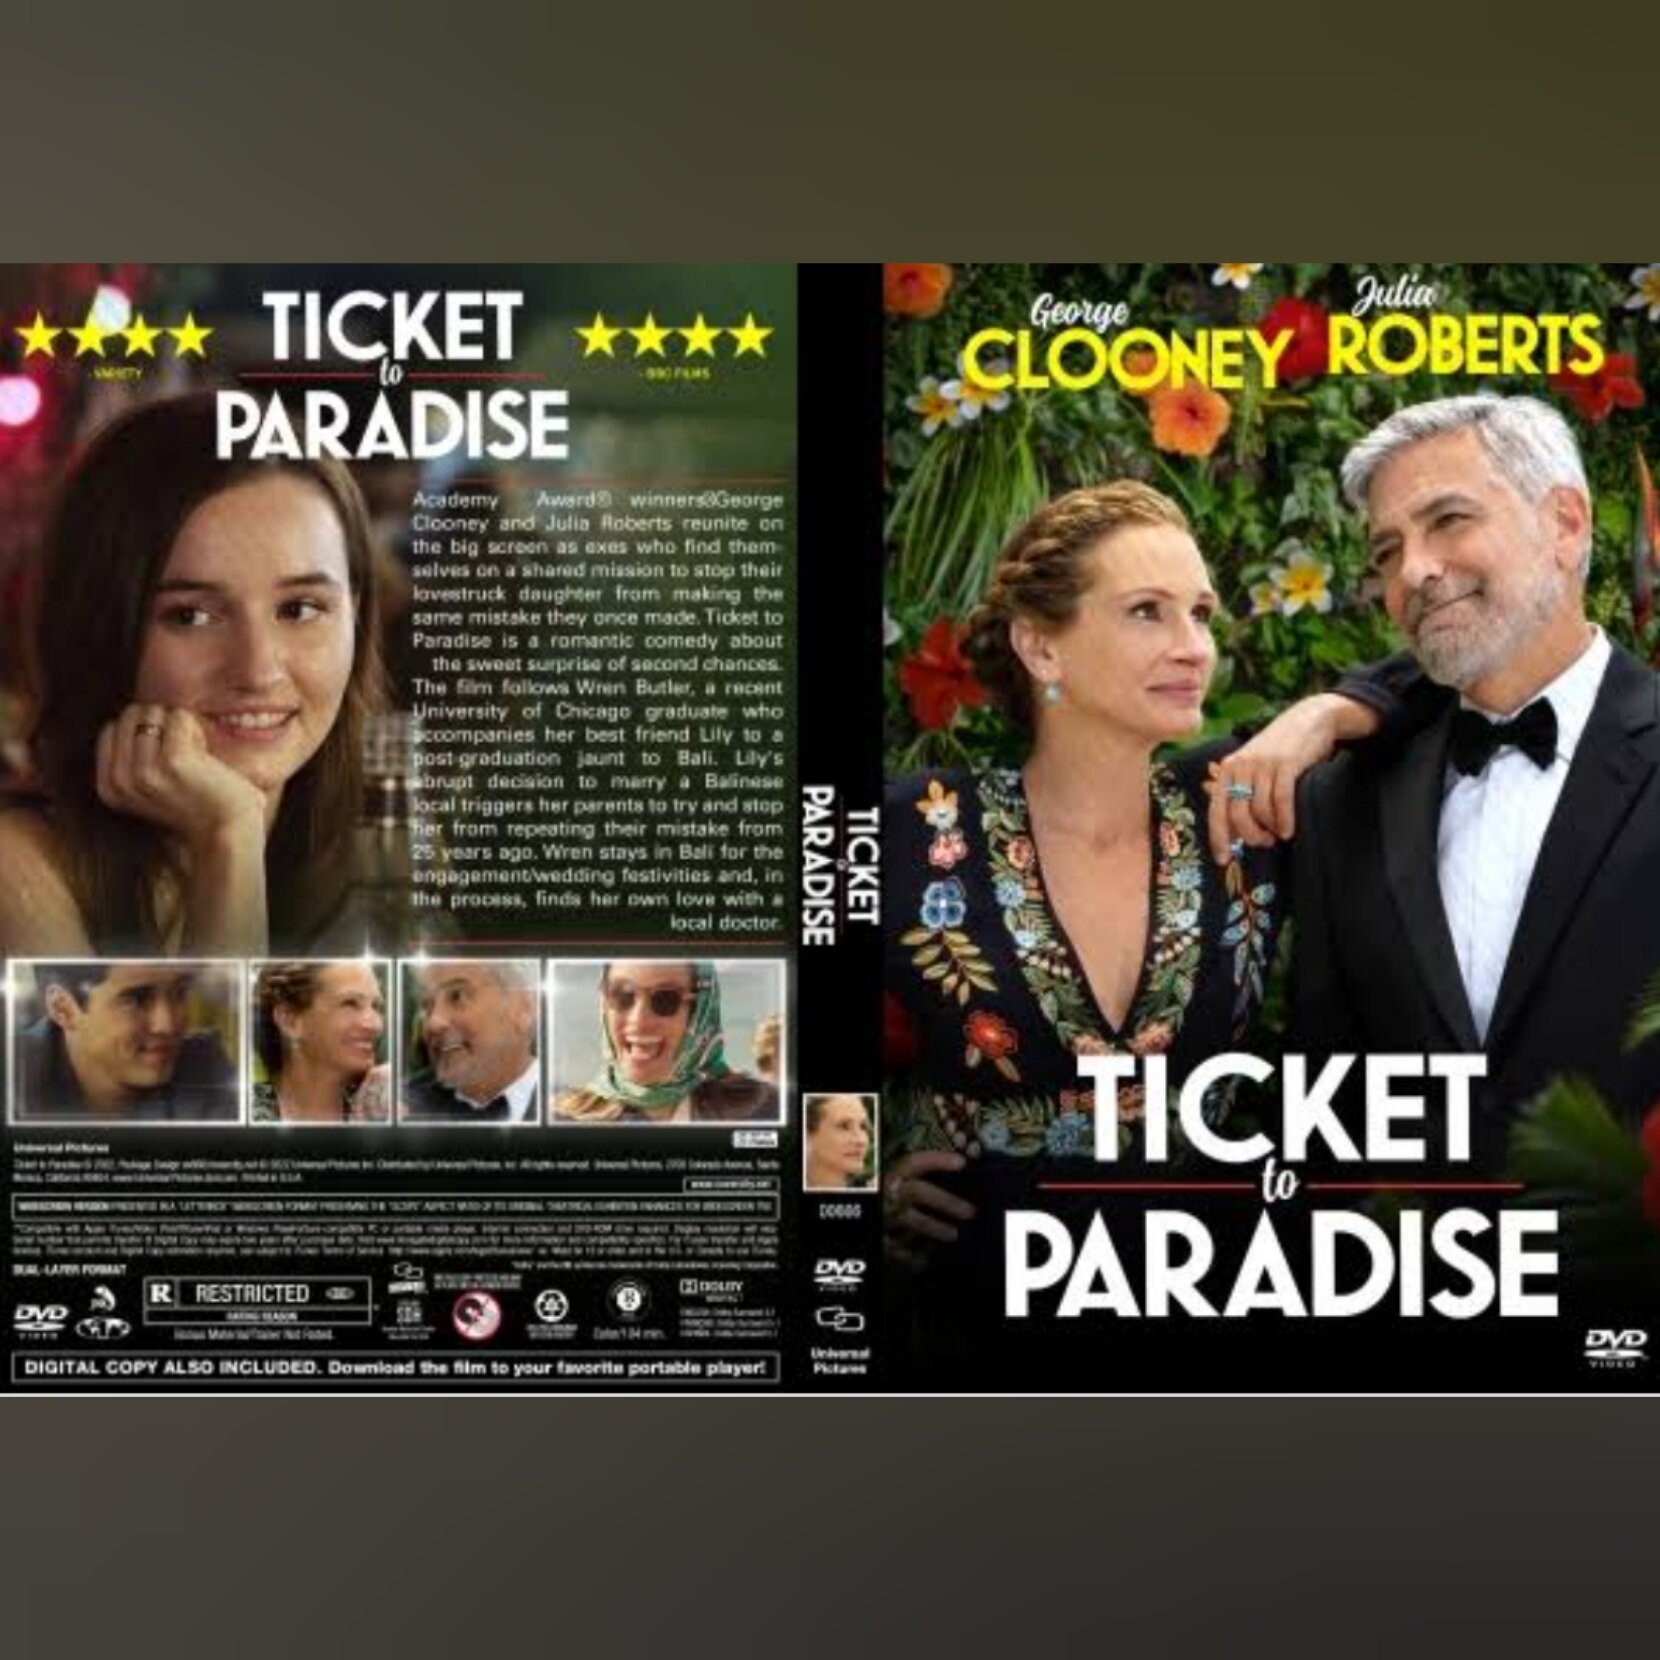 Ticket to Paradise [DVD] [2022]